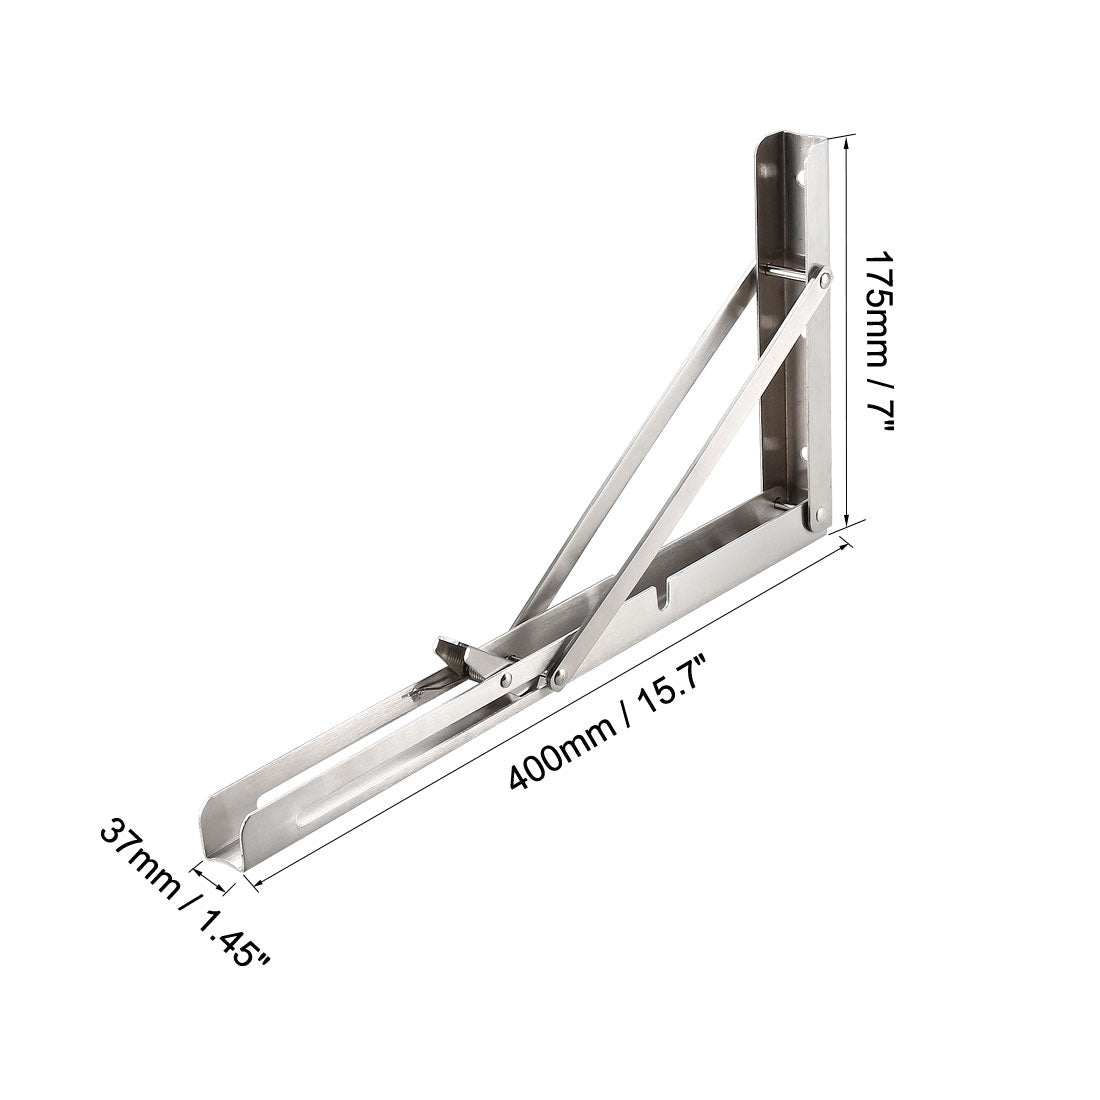 uxcell Uxcell Folding Bracket 16 inch 400mm for Shelf Table Desk Wall Mounted Support Collapsible Long Release Arm Space Saving Stainless Steel